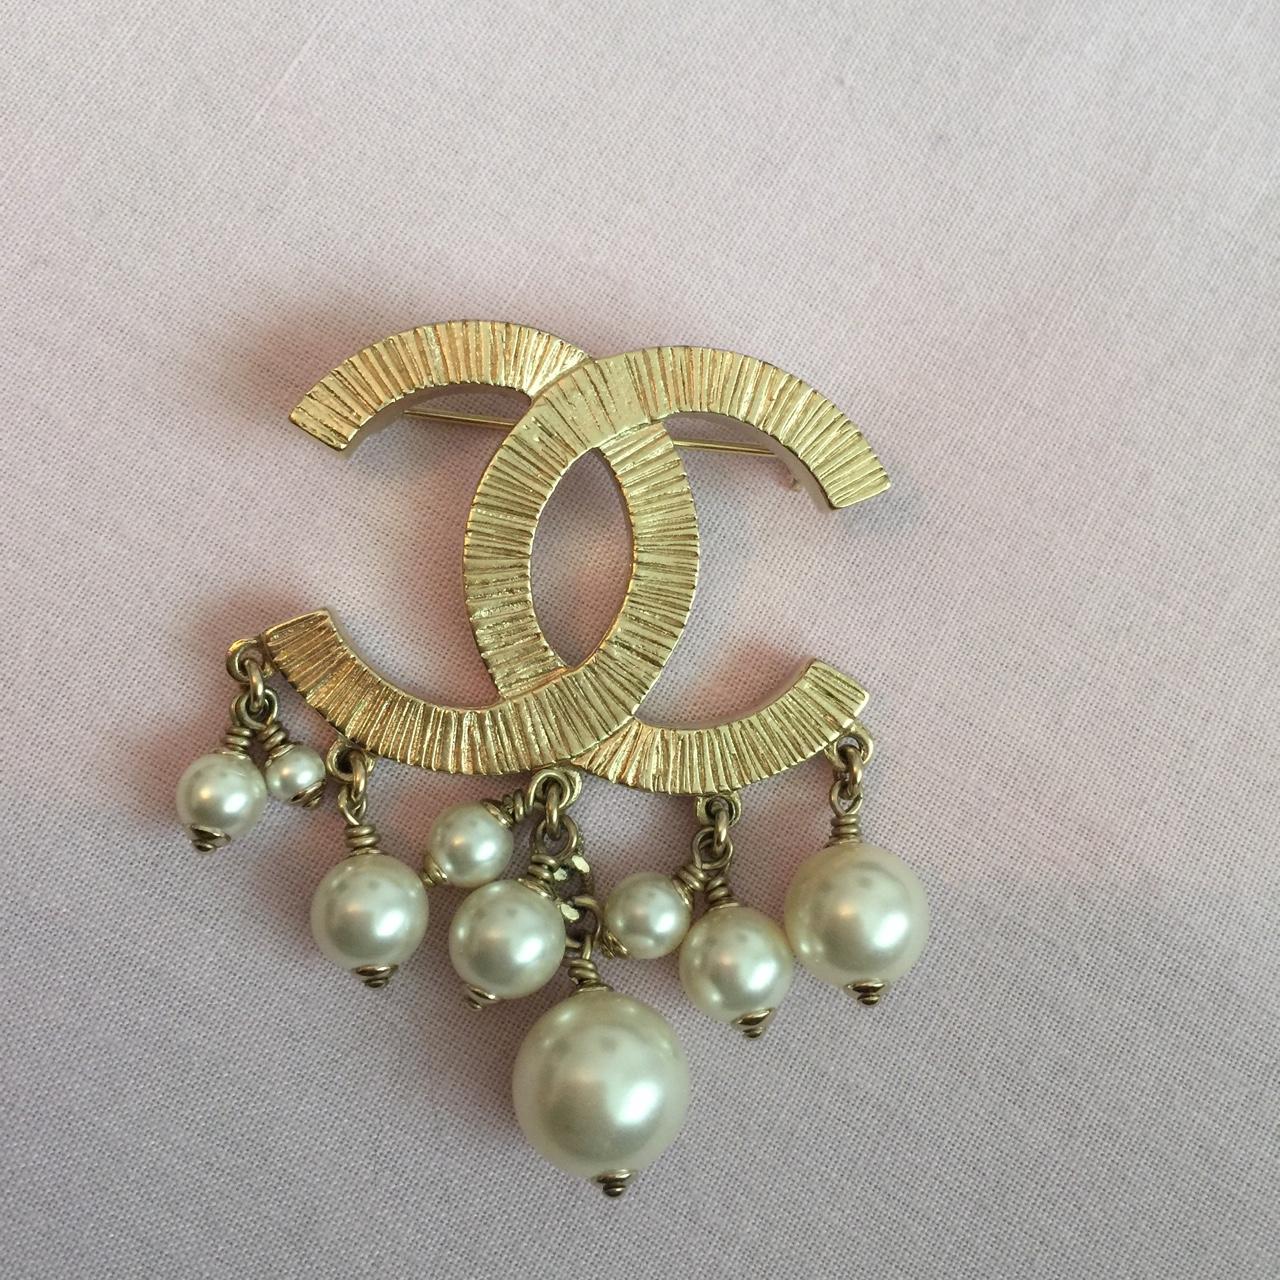 Beautiful Chanel brooch bought from Saks in New York - Depop